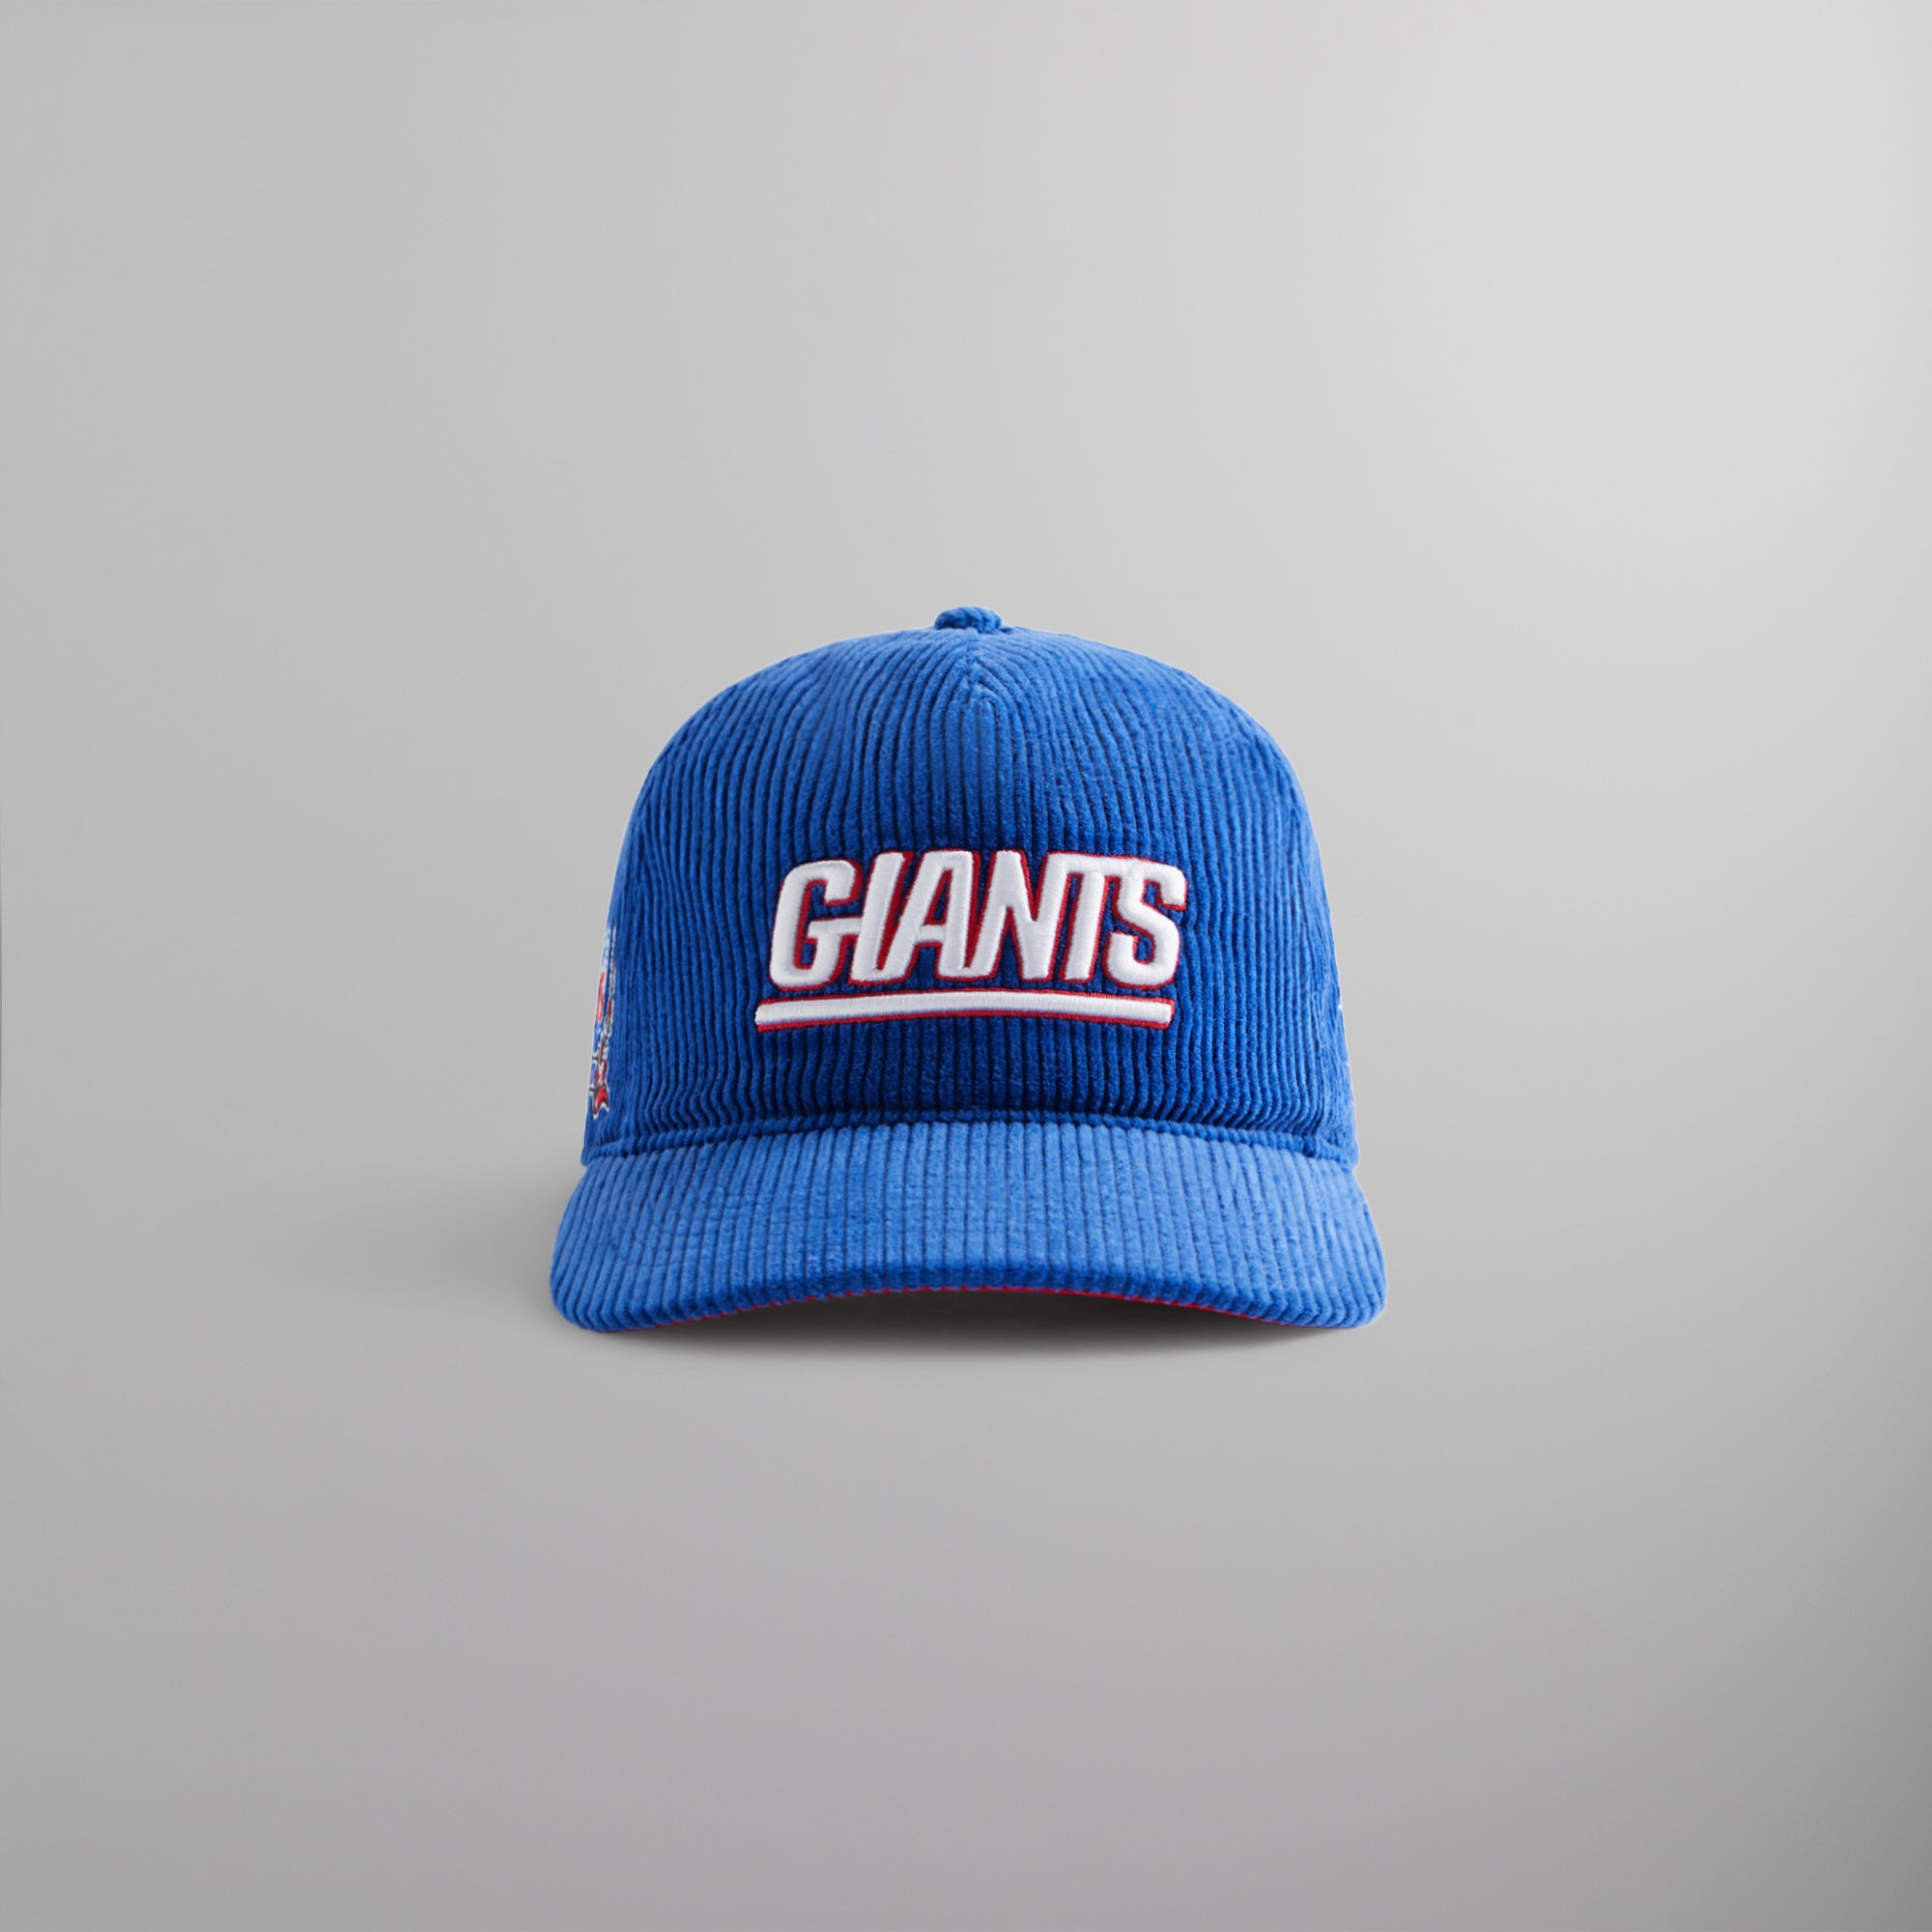 Kith x NFL Giants #39;47 Wool Fitted Cap Black